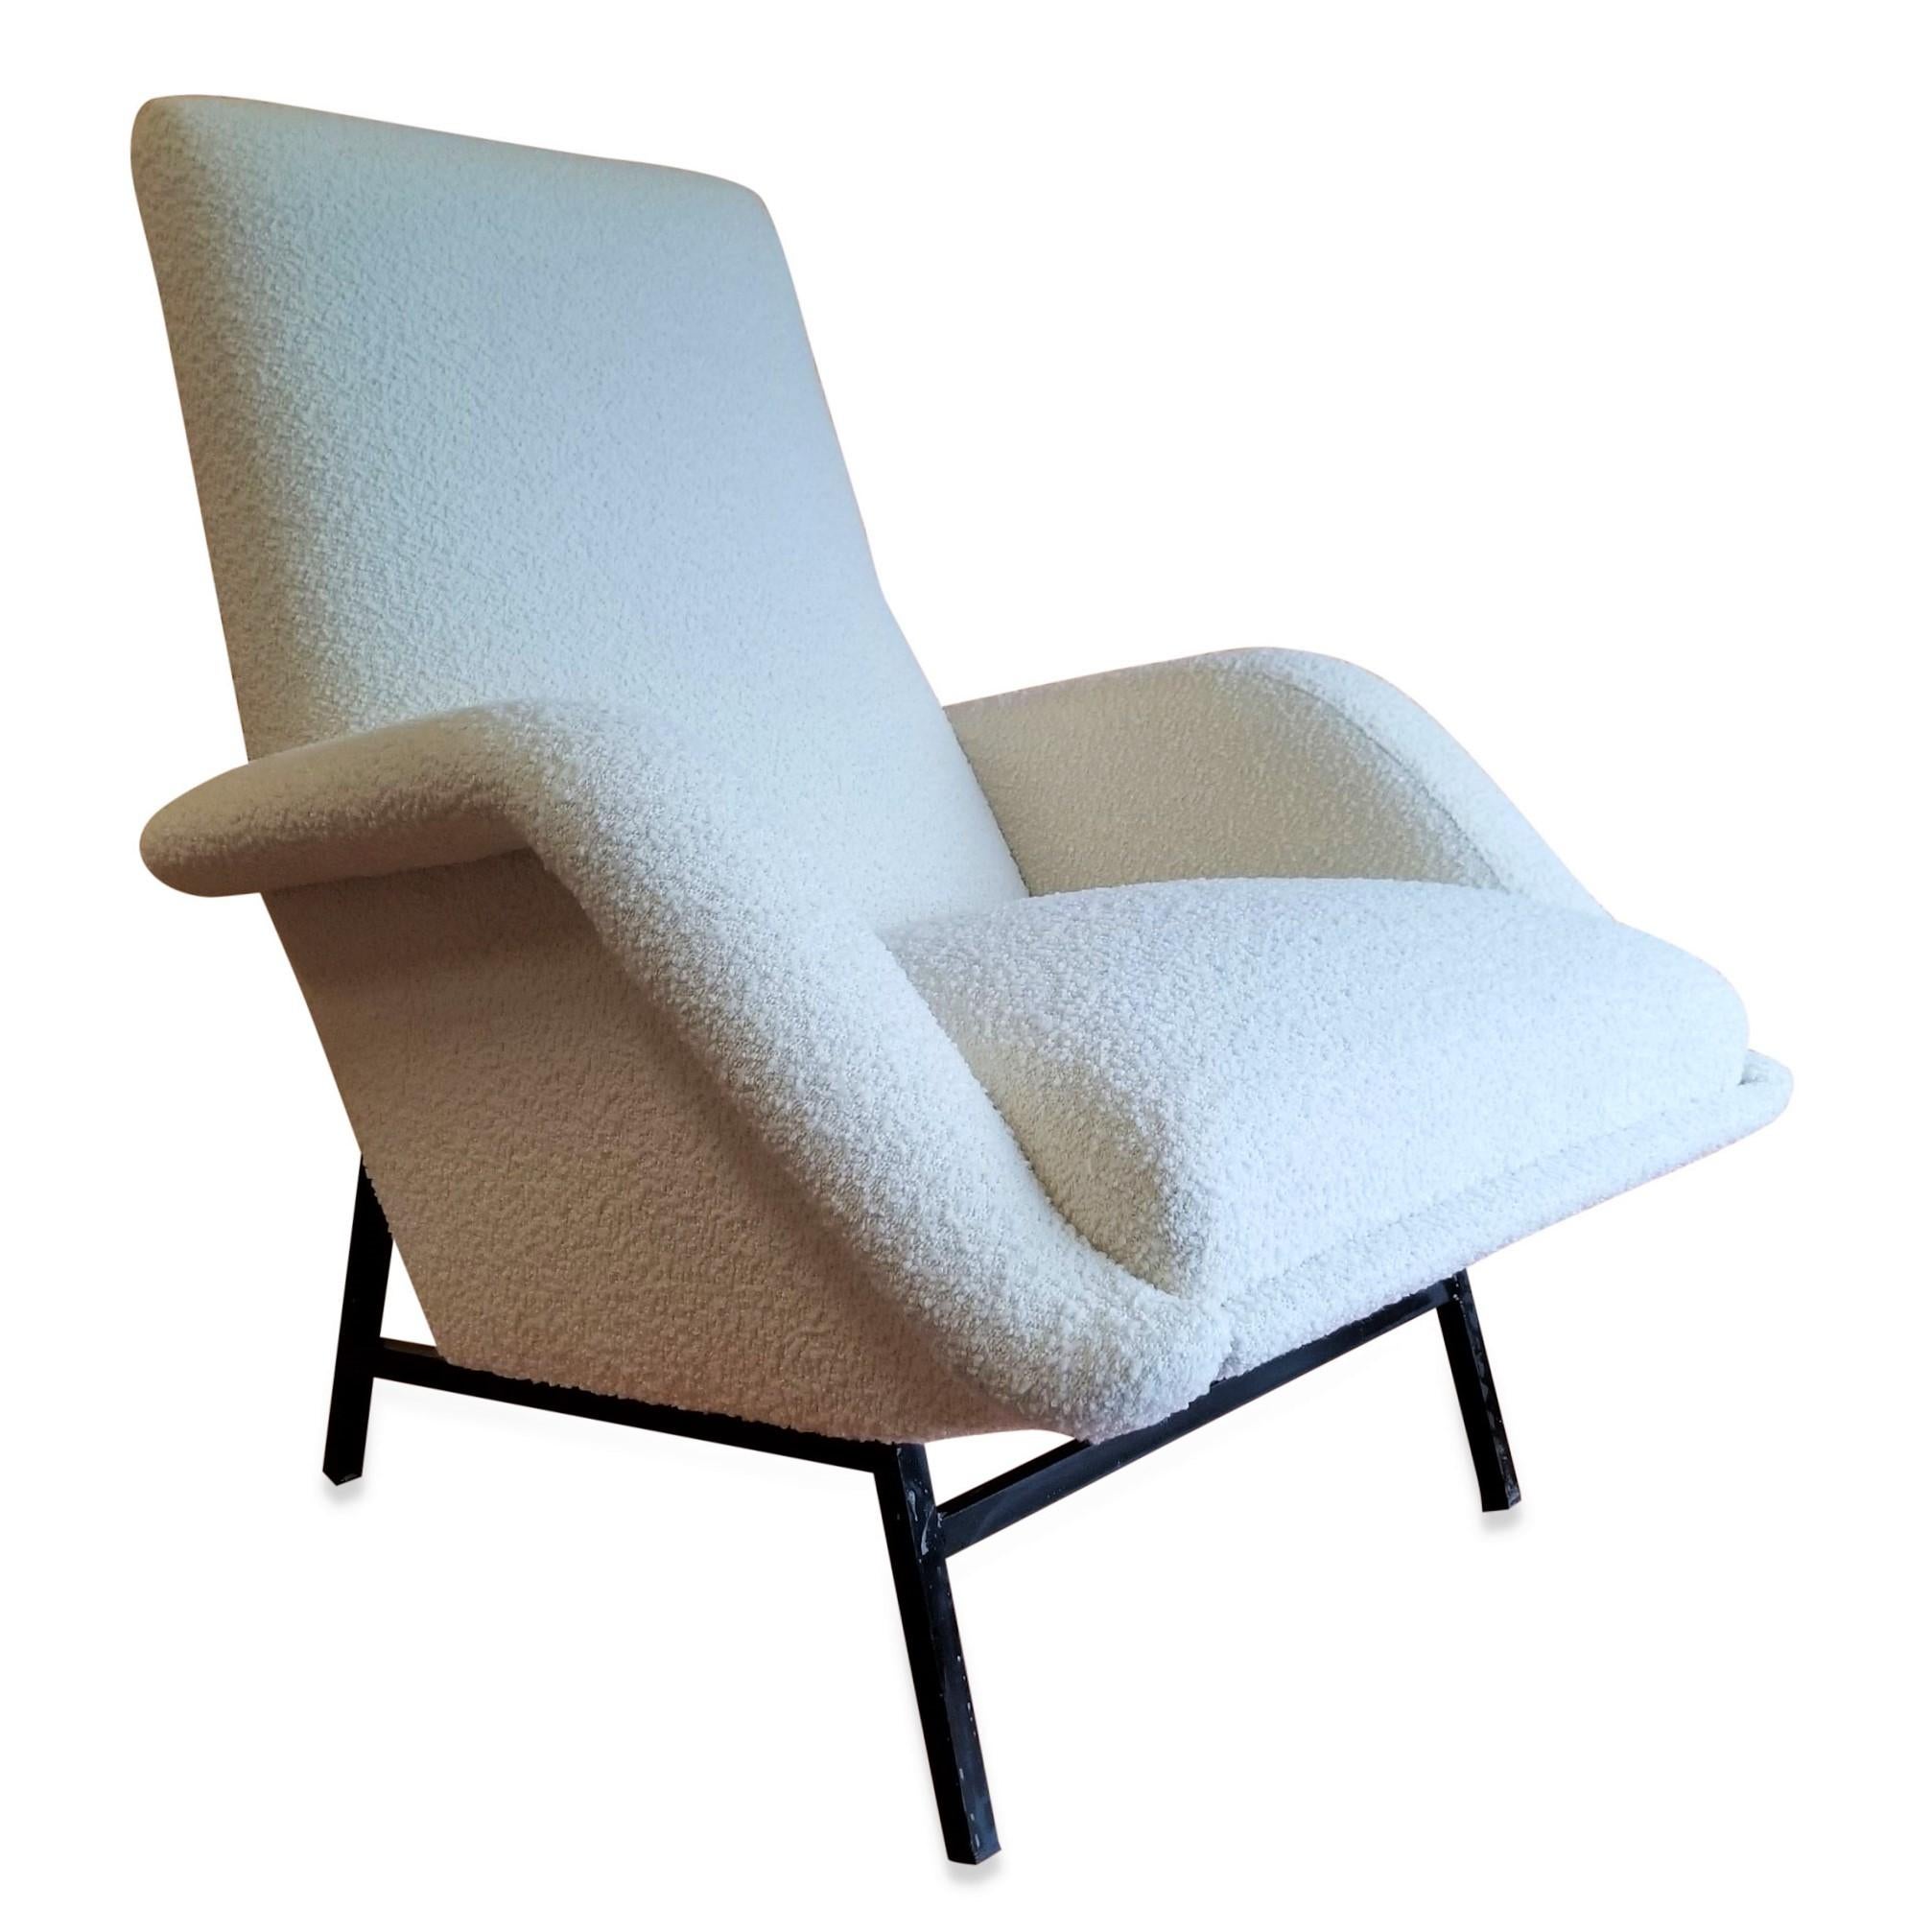 Mid-20th Century Rare Pair of Creme Bouclette Guy Besnard Armchairs, France, 1950s For Sale